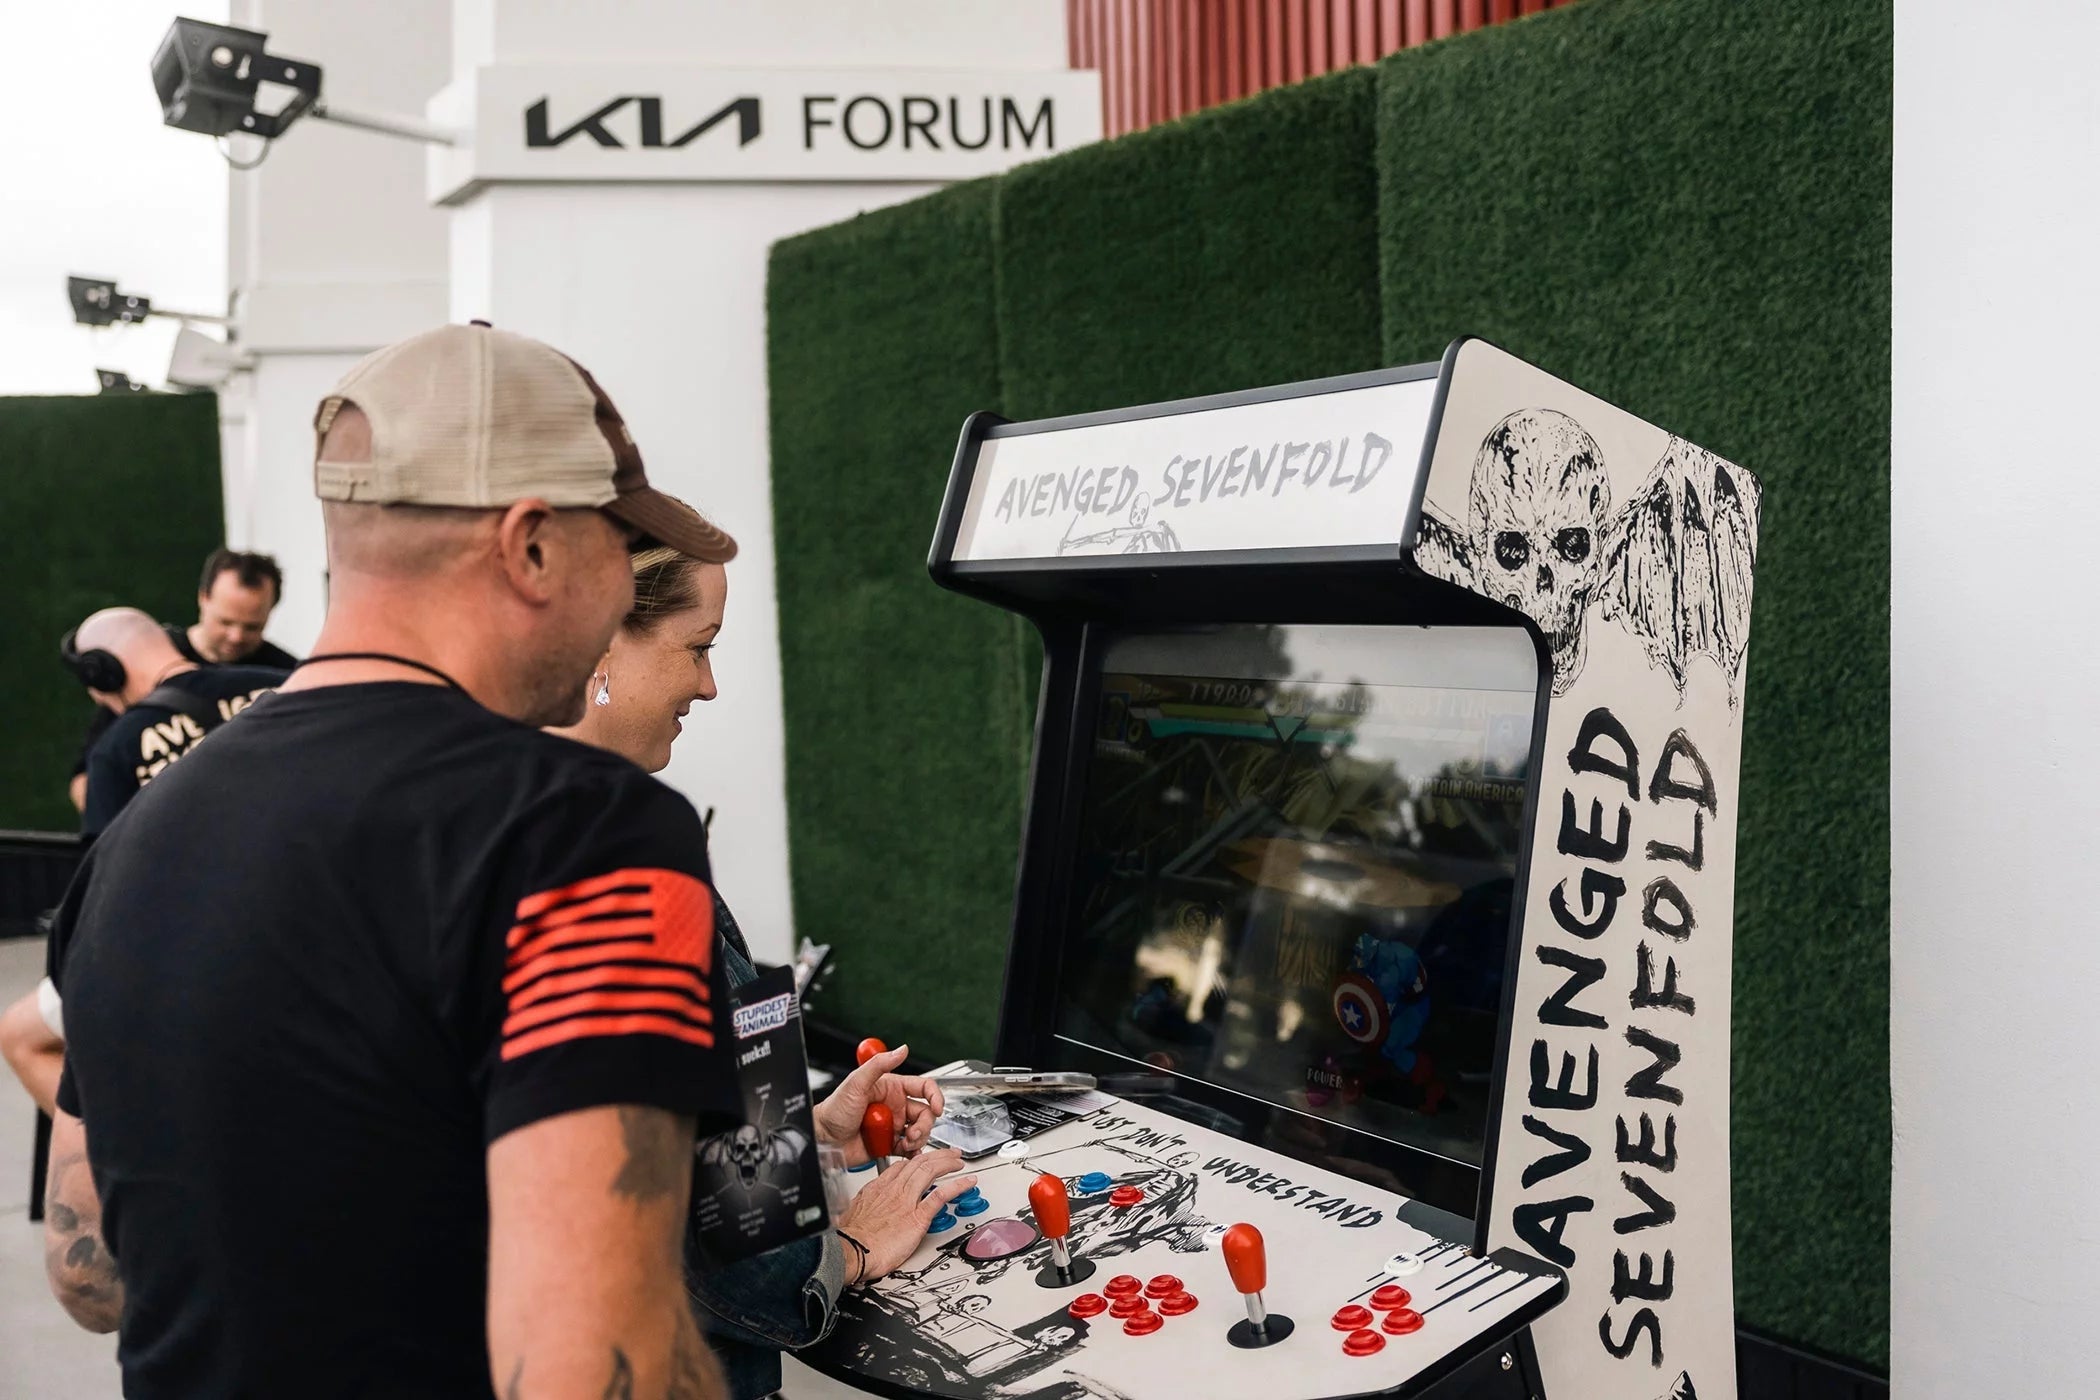 Creative Arcades x Avenged Sevenfold VIP's with VIP Gaming Experience